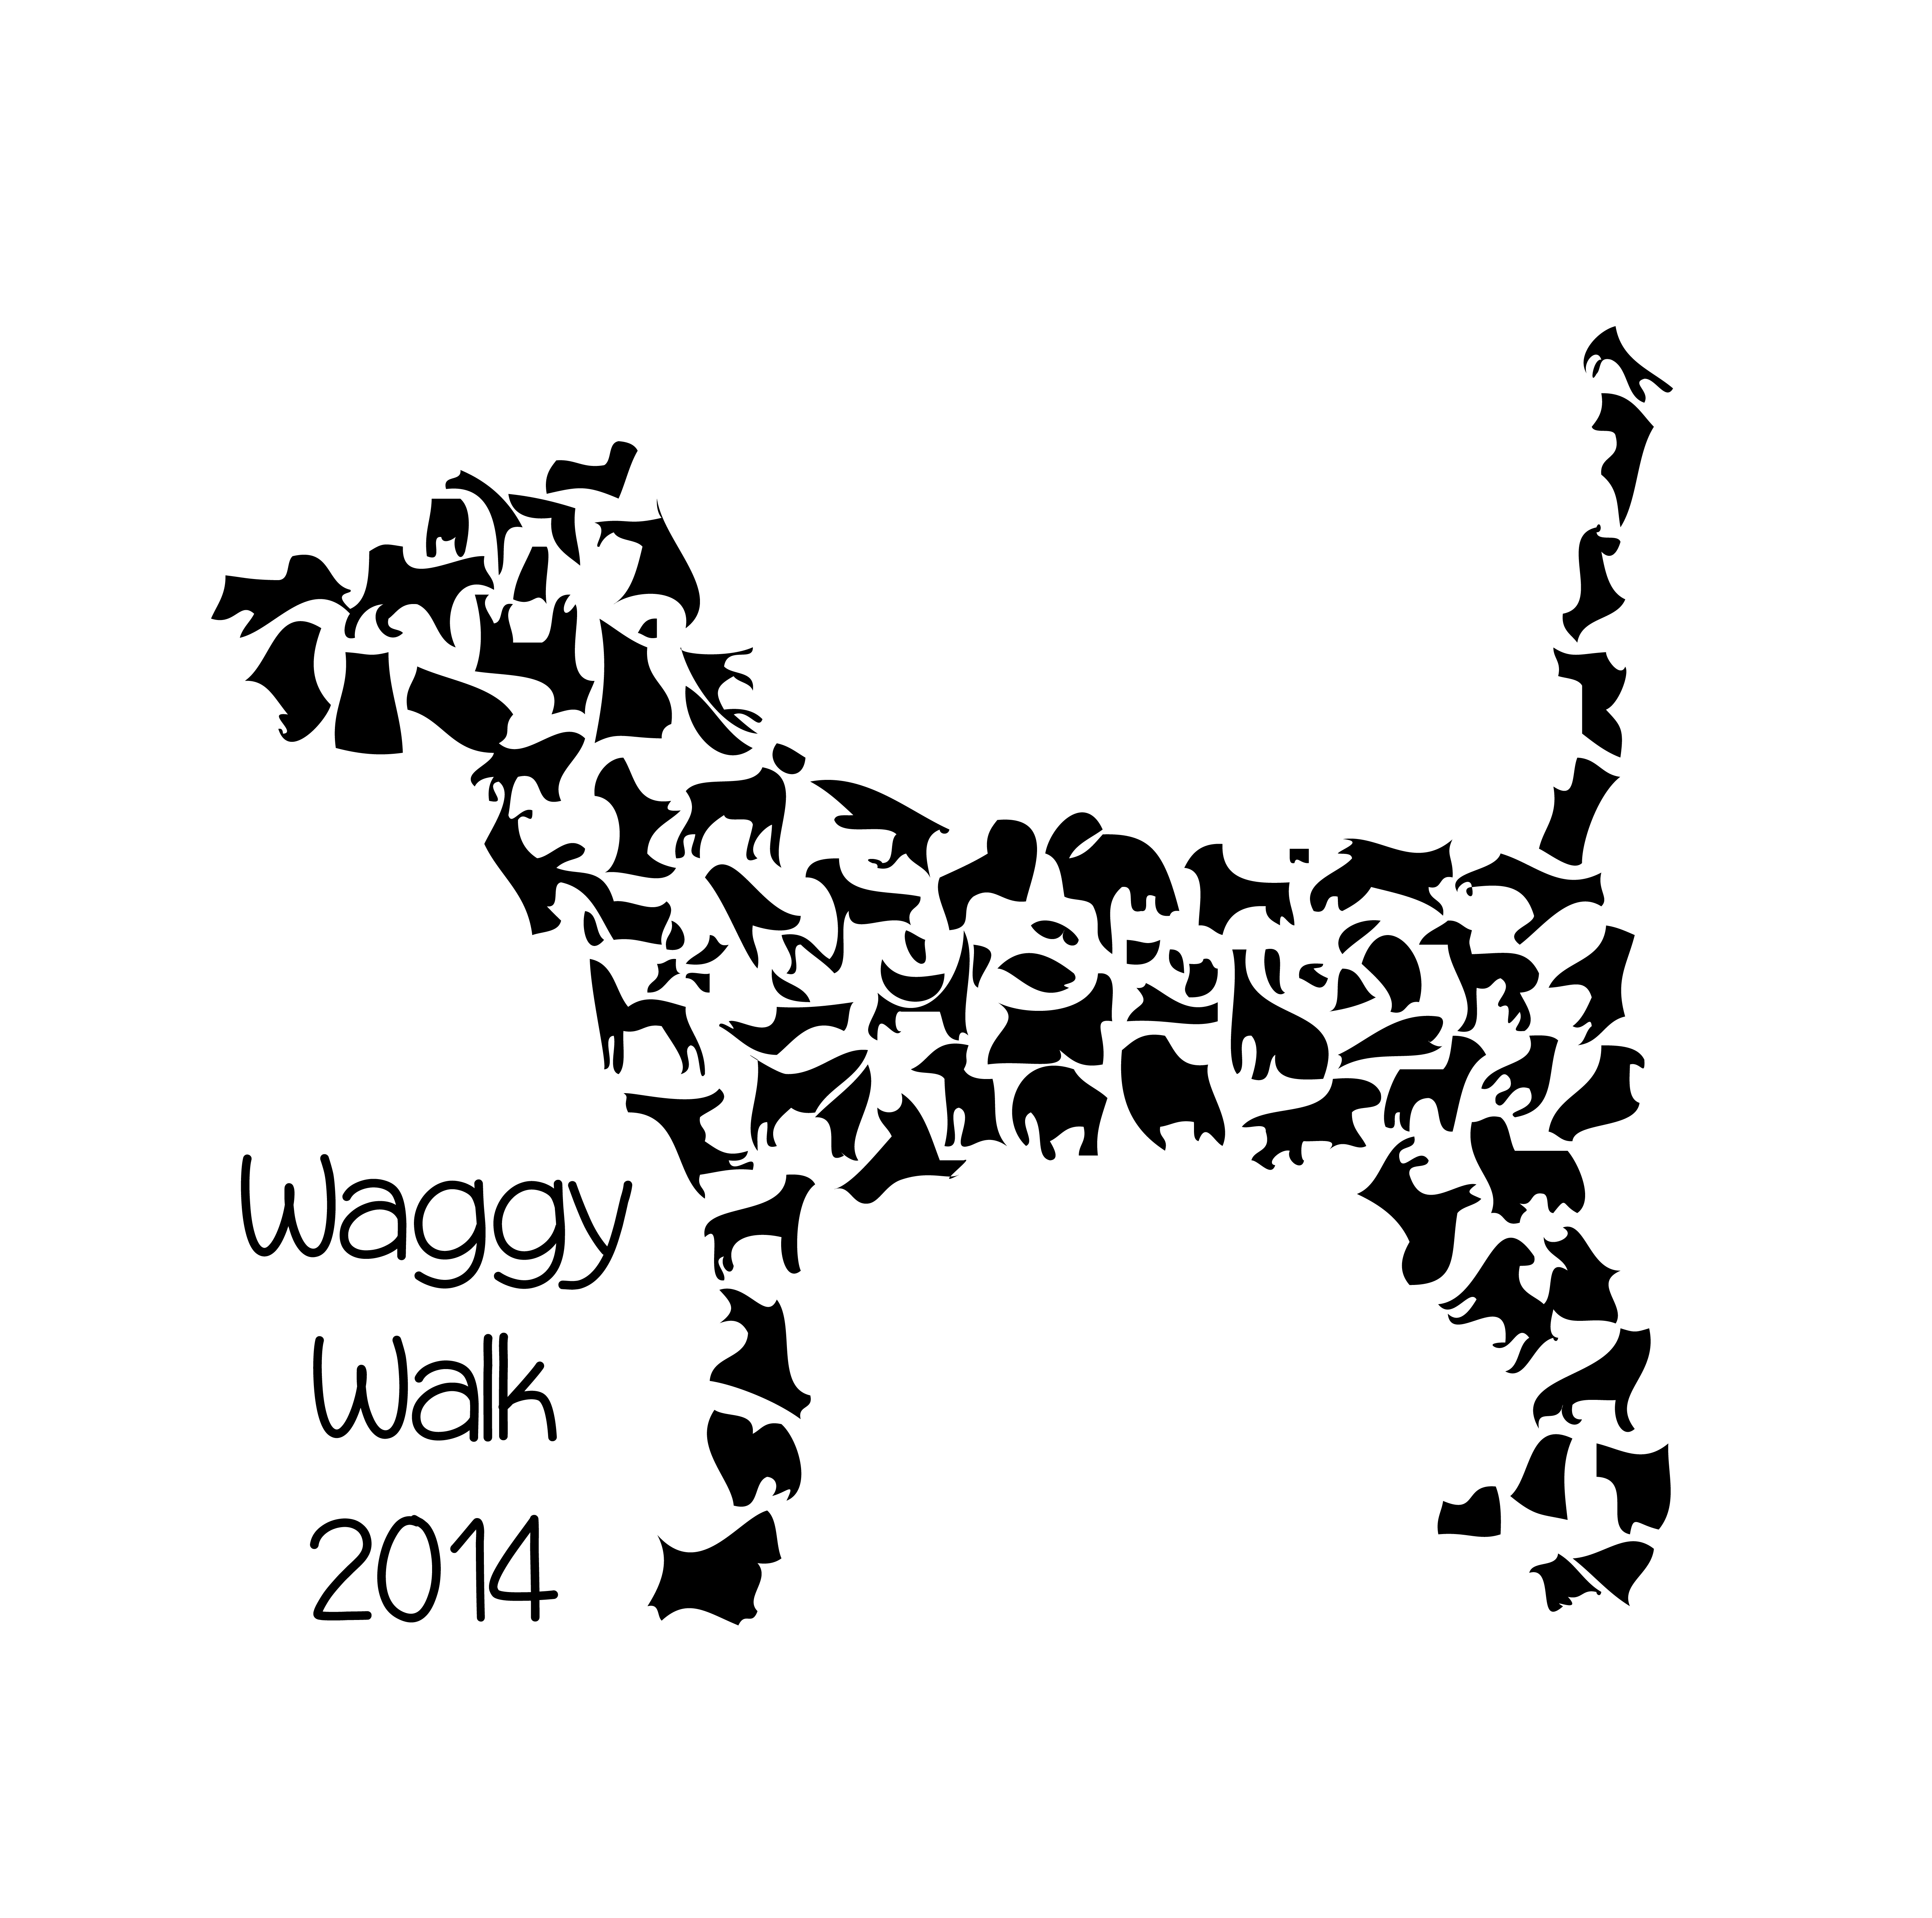 Waggy Walk 2014. The UKs largest dog walk raising funds for Dogs on Death Row